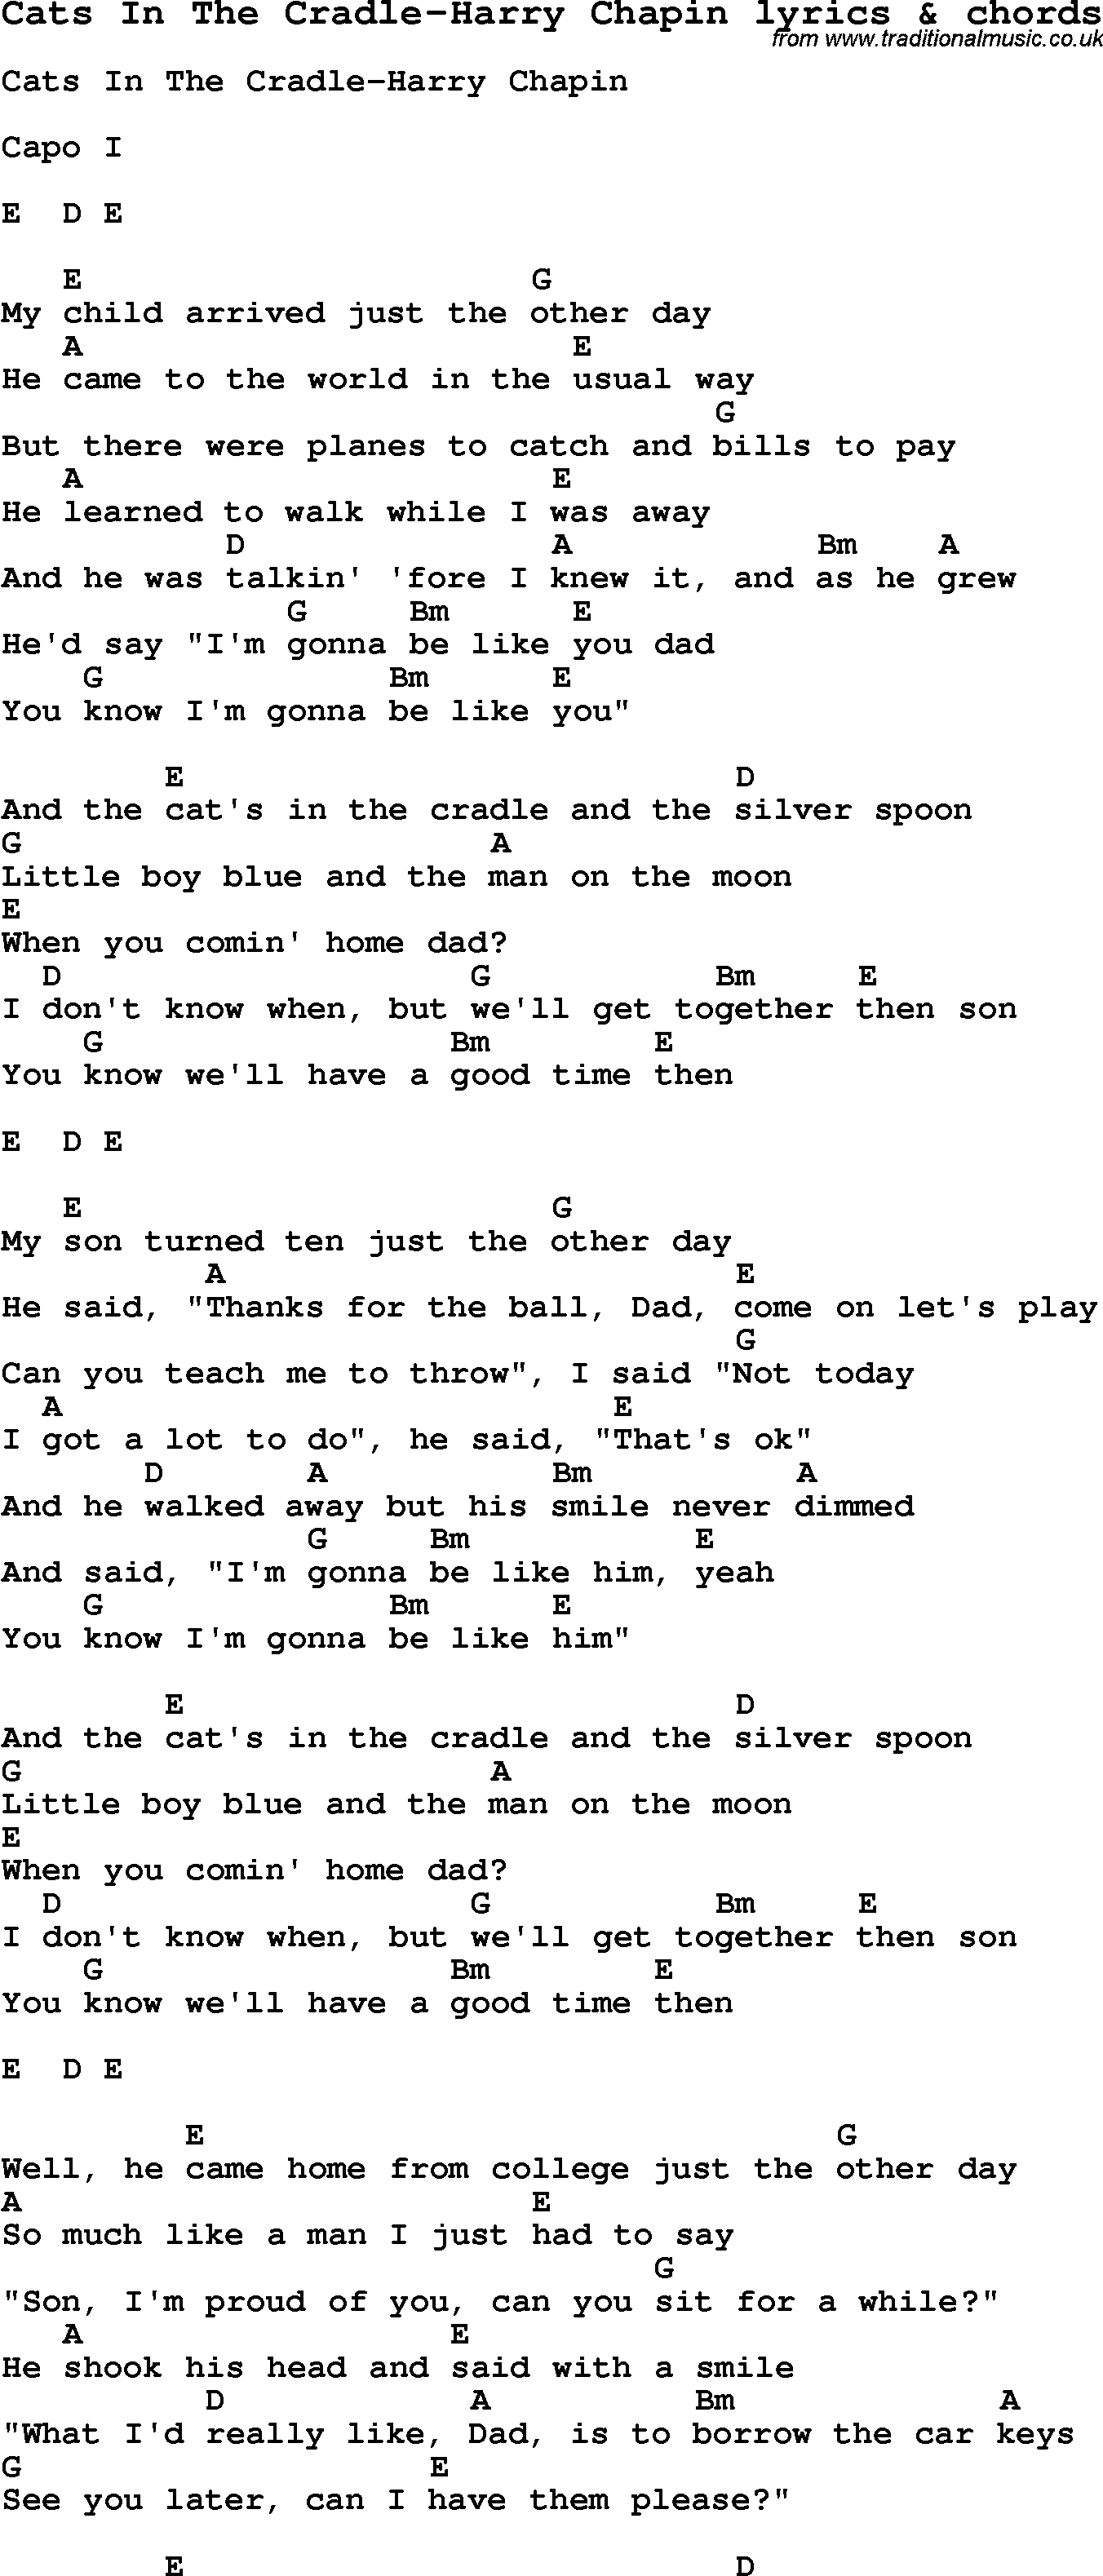 Love Song Lyrics forCats In The CradleHarry Chapin with chords.